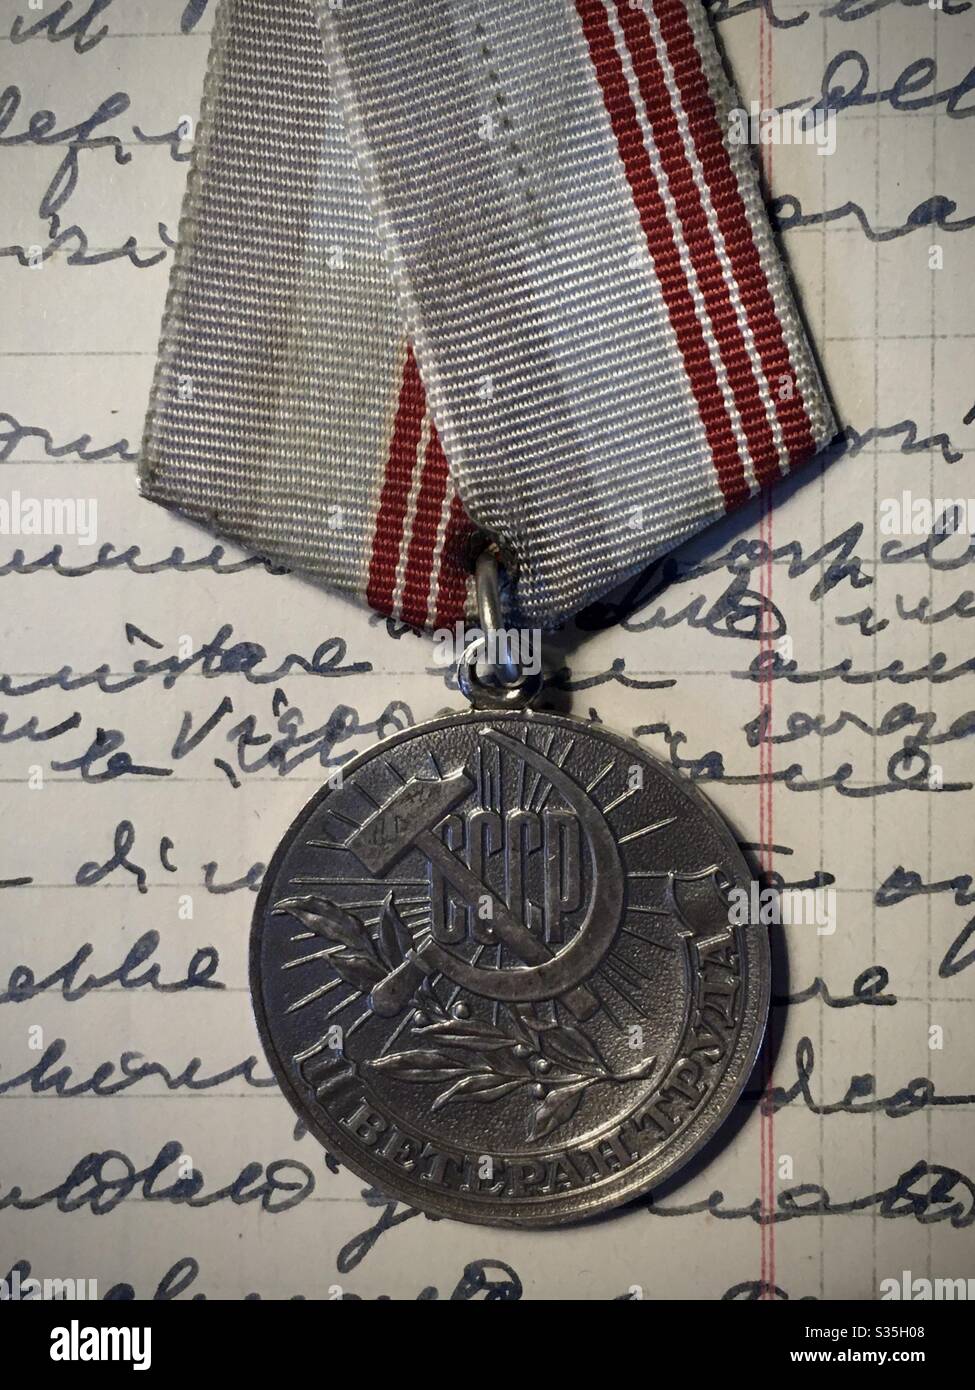 Old Russian ex CCCP commemorative war honor medal on a page of notebook hand written Stock Photo